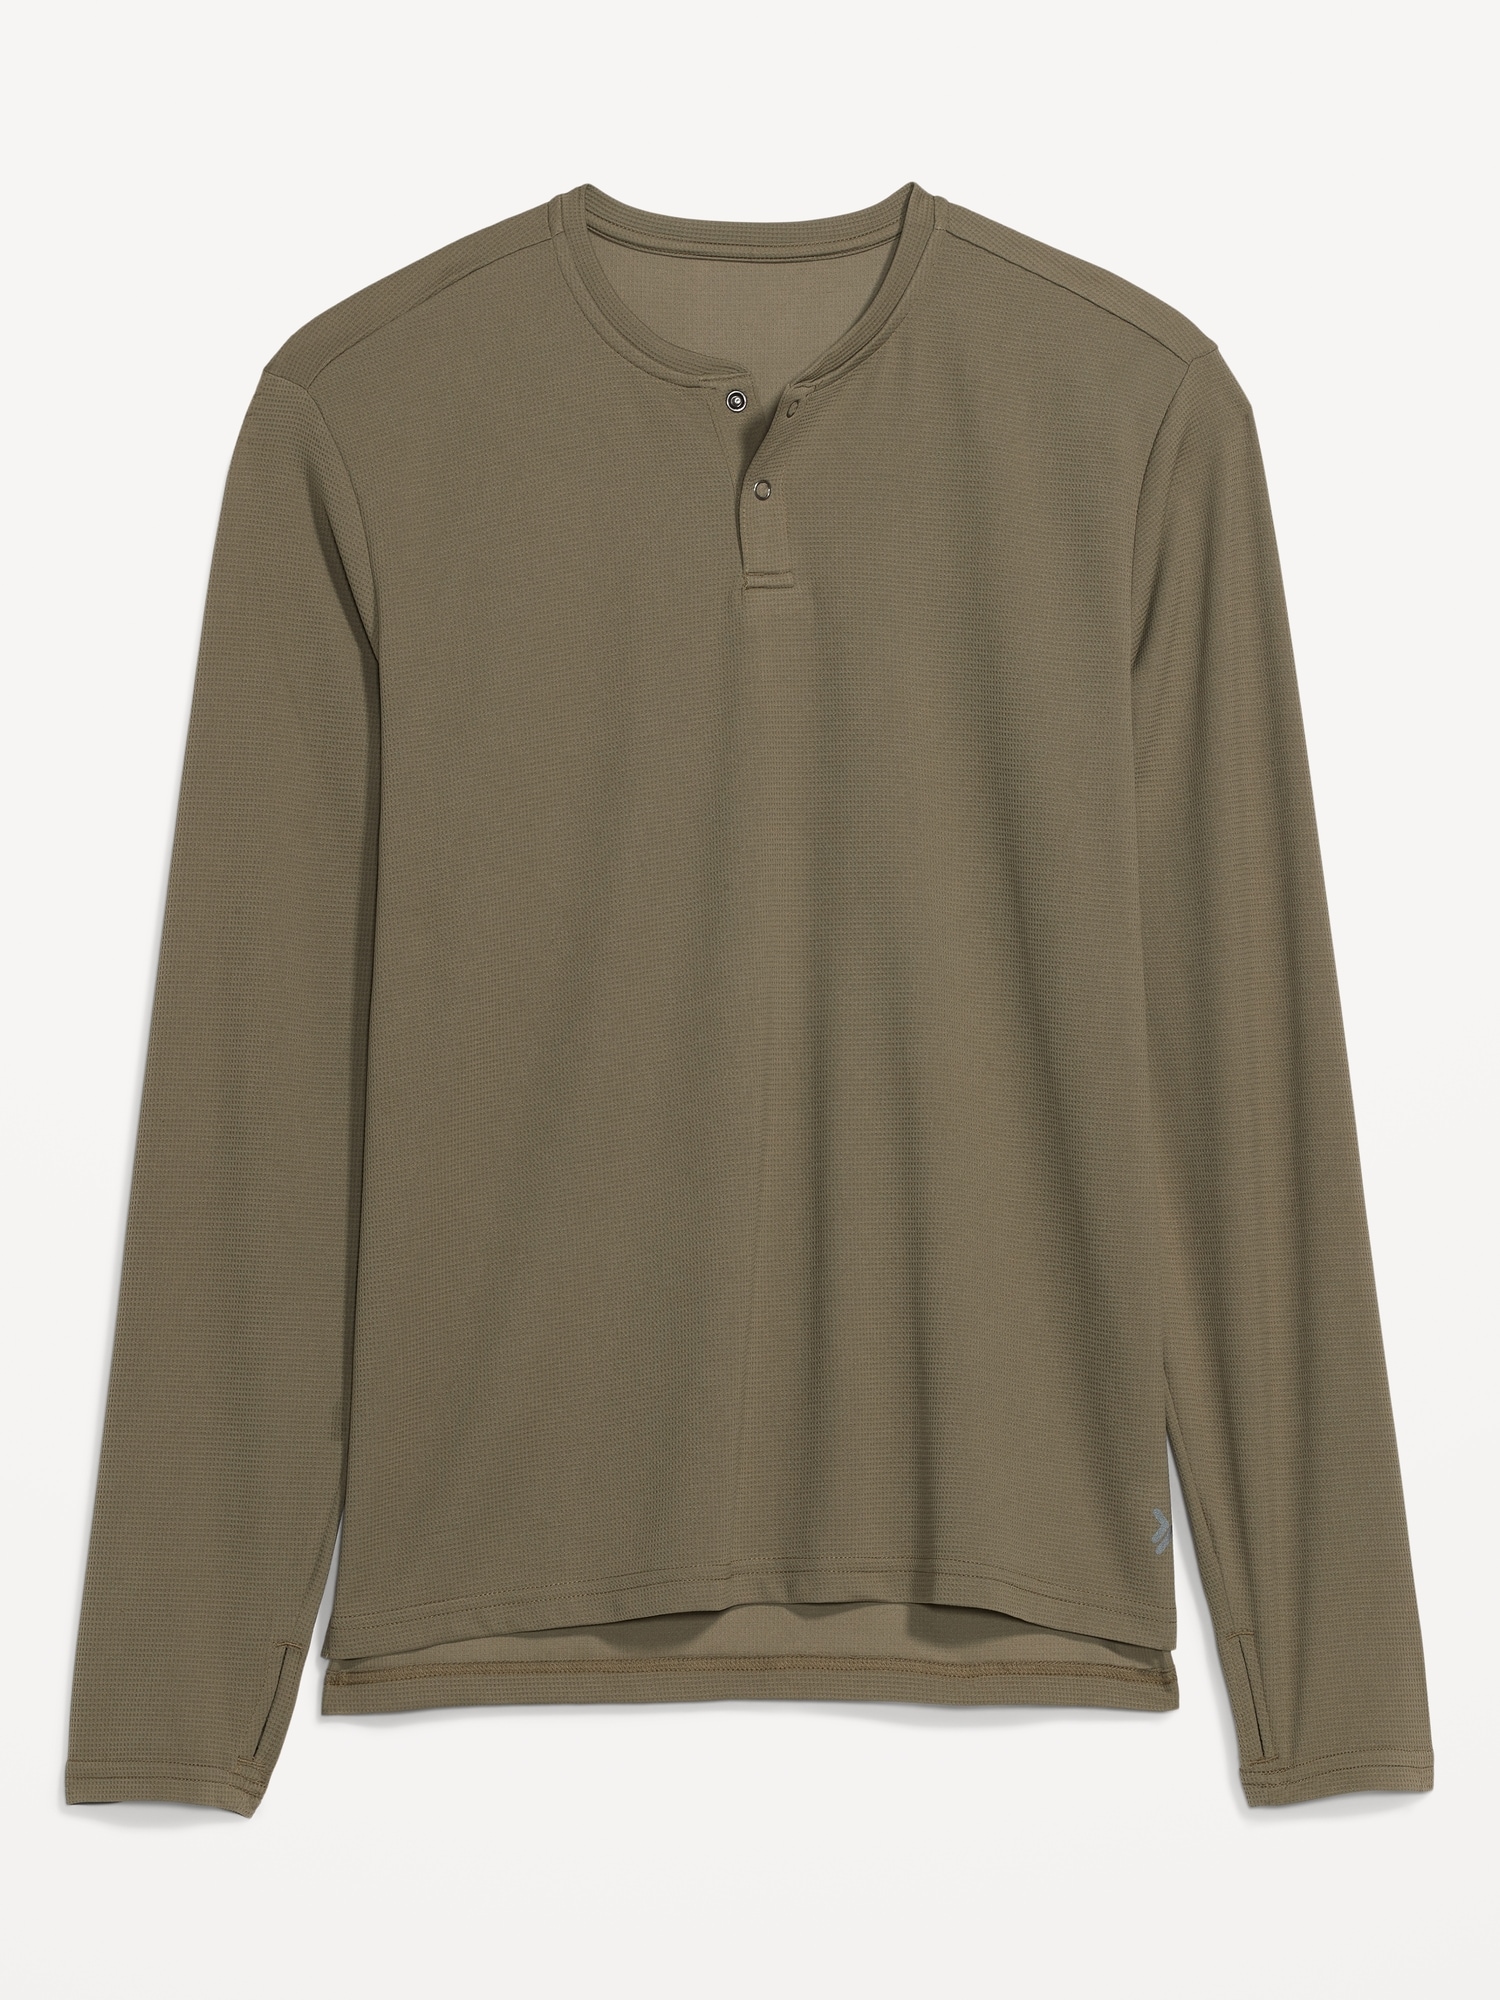 The Authentic T-Shirt Company ATC8064 ATC ESActive® Vintage Thermal Long  Sleeve Henley Shirt 